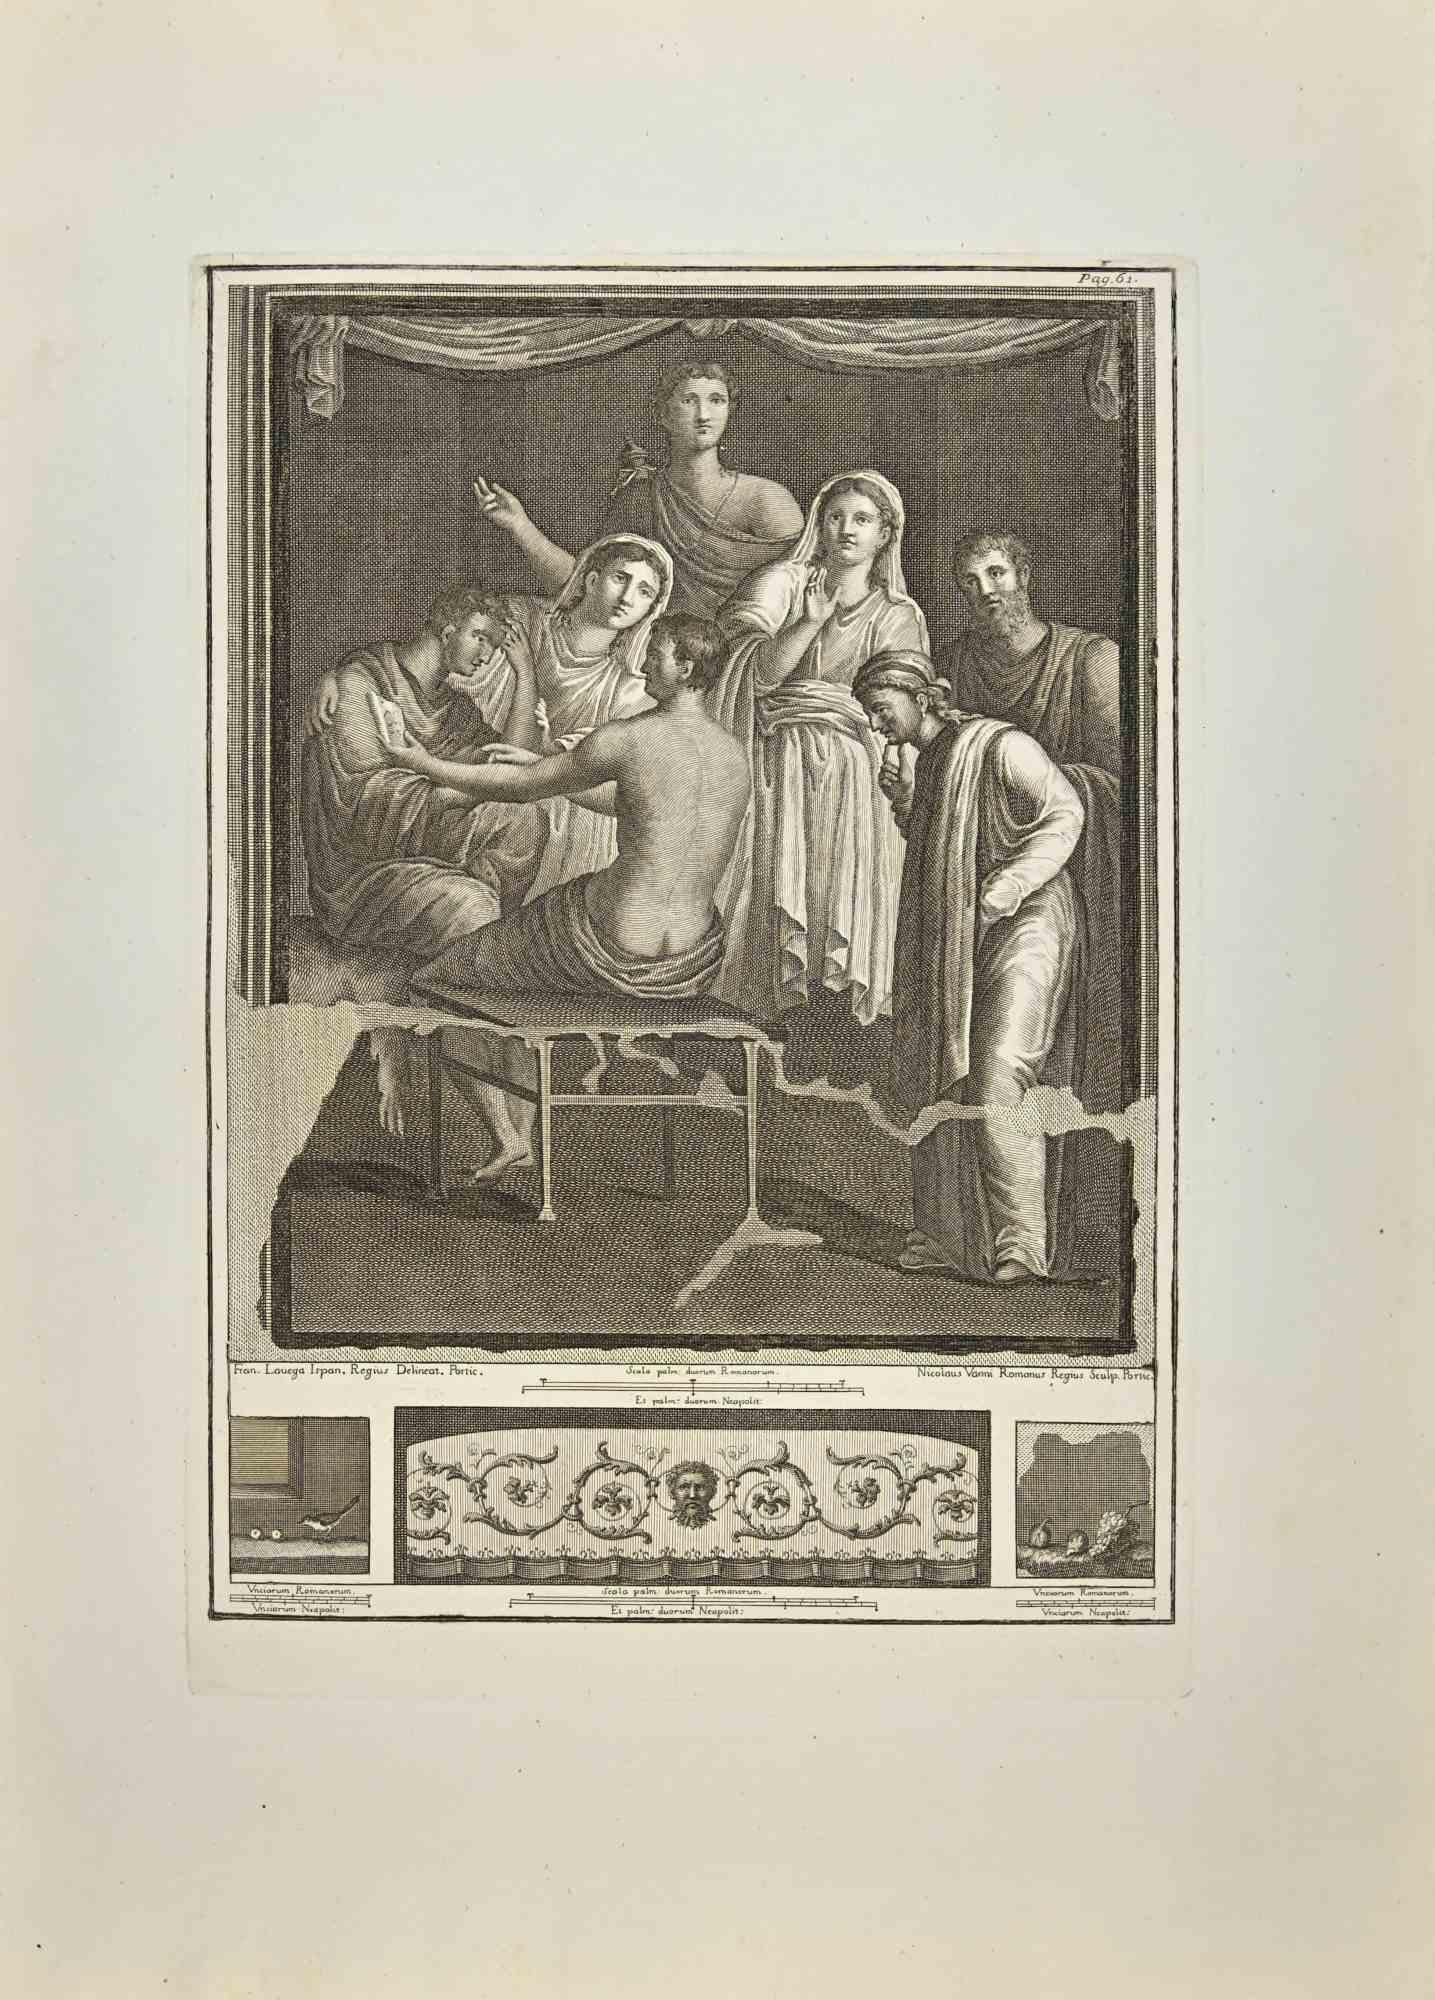 Rhetoric In The Roman Empire from "Antiquities of Herculaneum" is an etching on paper realized by Nicola Vanni in the 18th Century.

Signed on the plate.

Good conditions with some folding.

The etching belongs to the print suite “Antiquities of